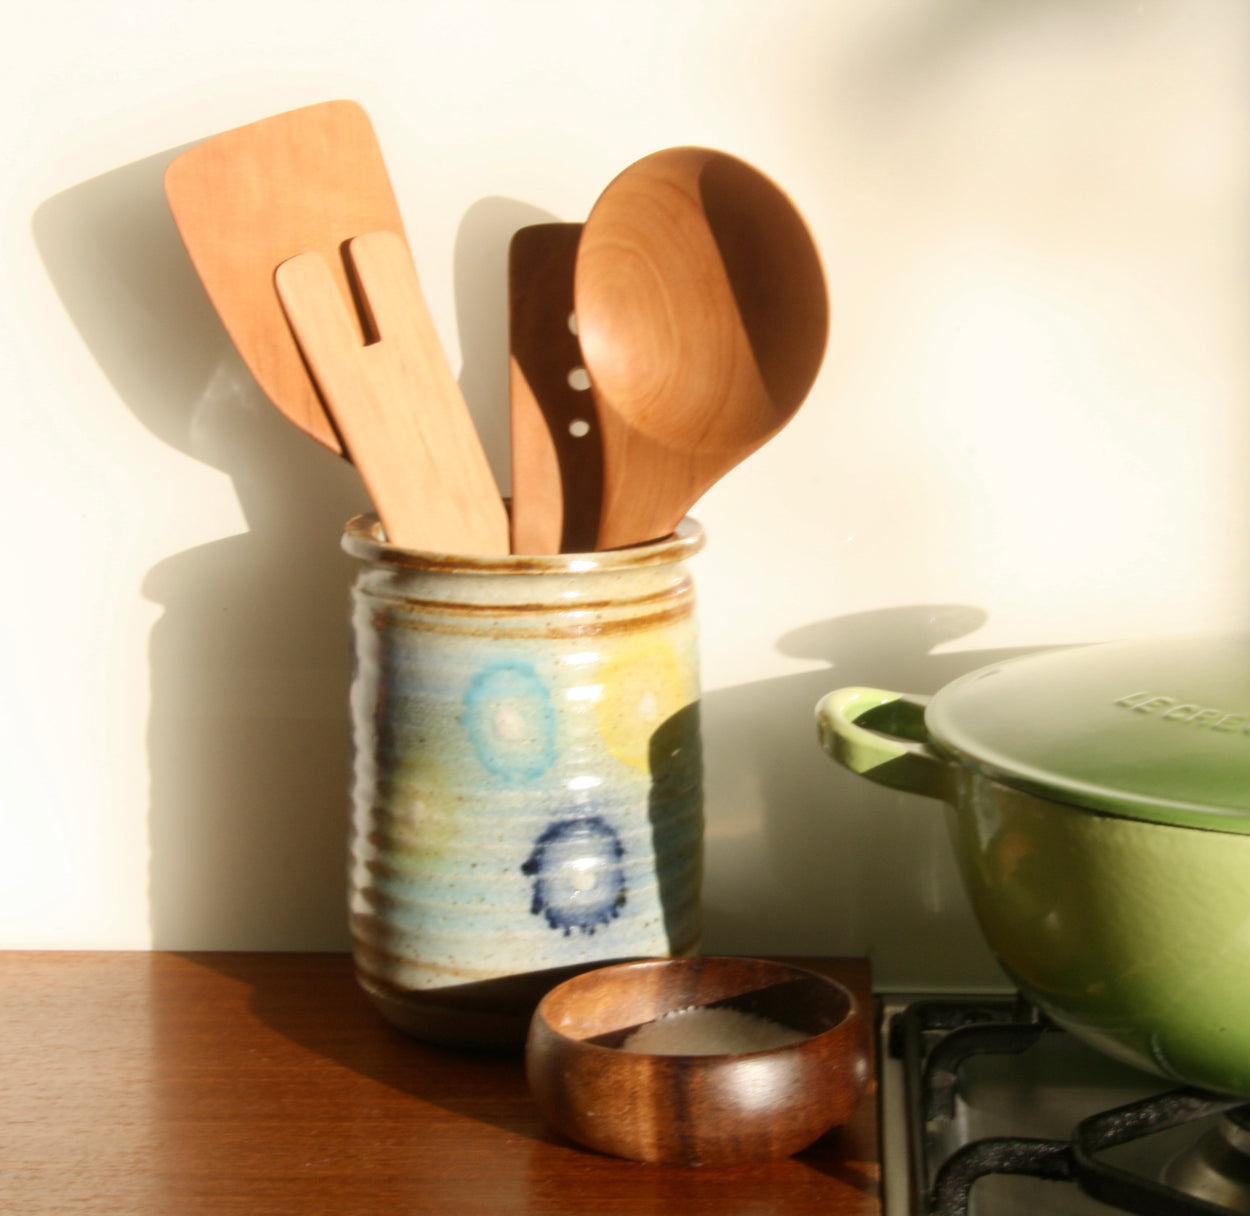 Handmade Pear Wood Soup Ladle with other Pear Wood kitchen utensil in ceramic kitchen utensil holder, next to green pot and salt dish.